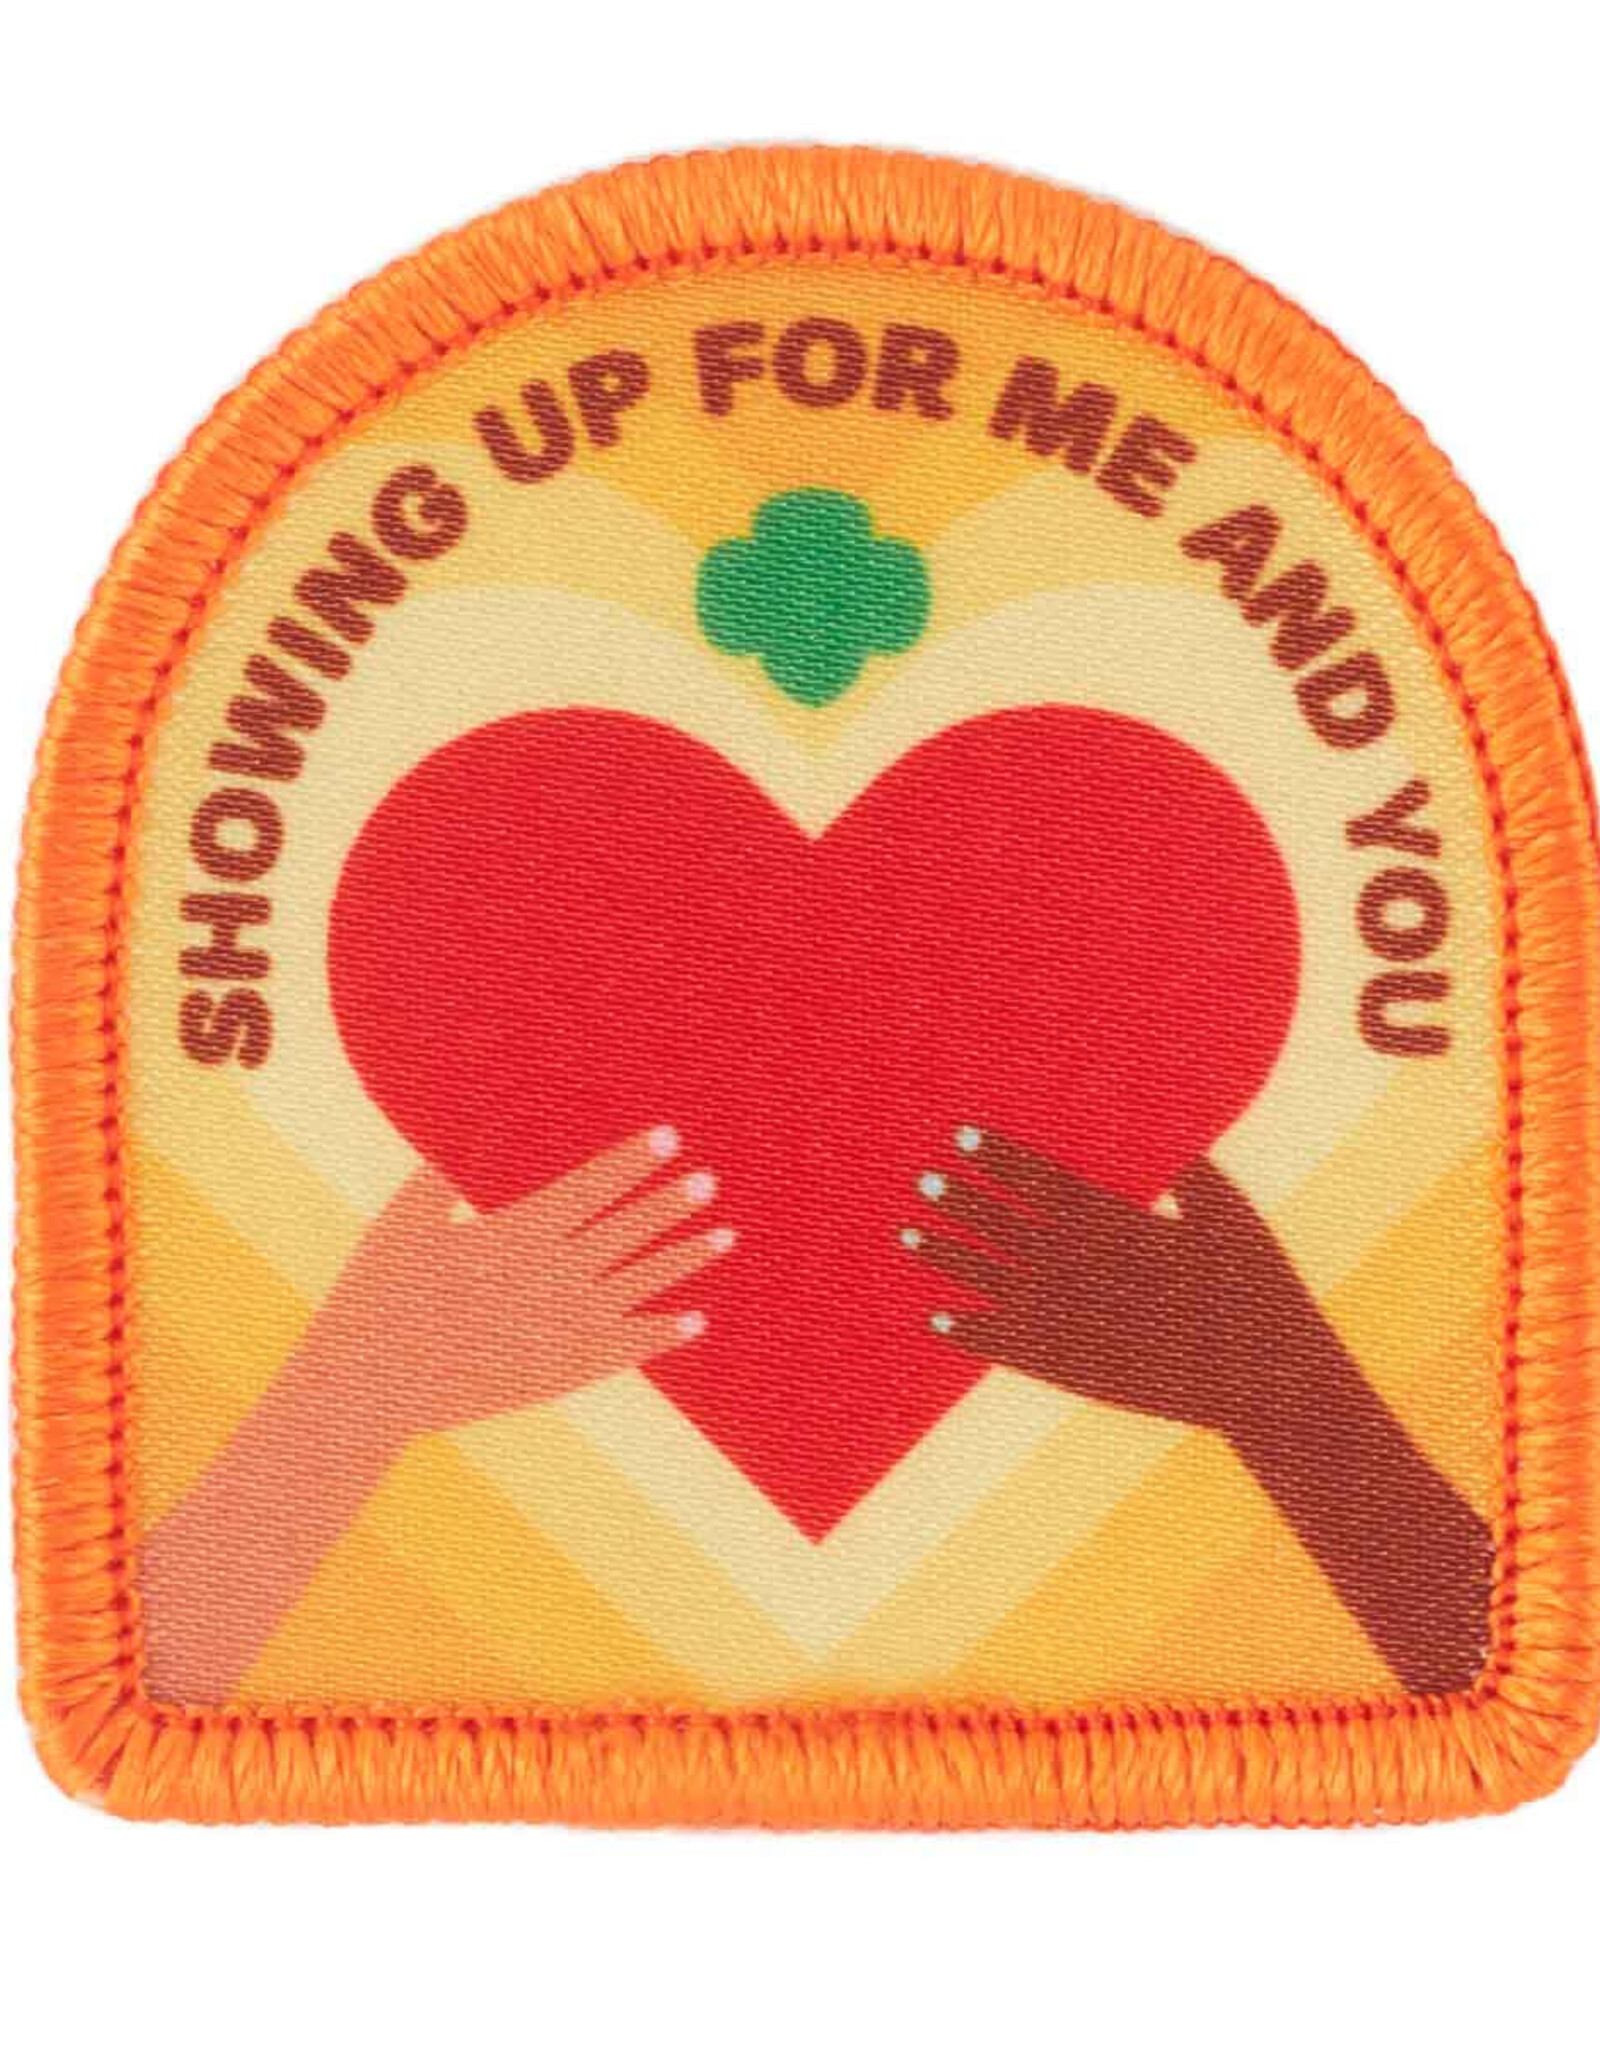 Sen / Amb Mental Wellness Sew-On Patch - Showing Up For Me and You